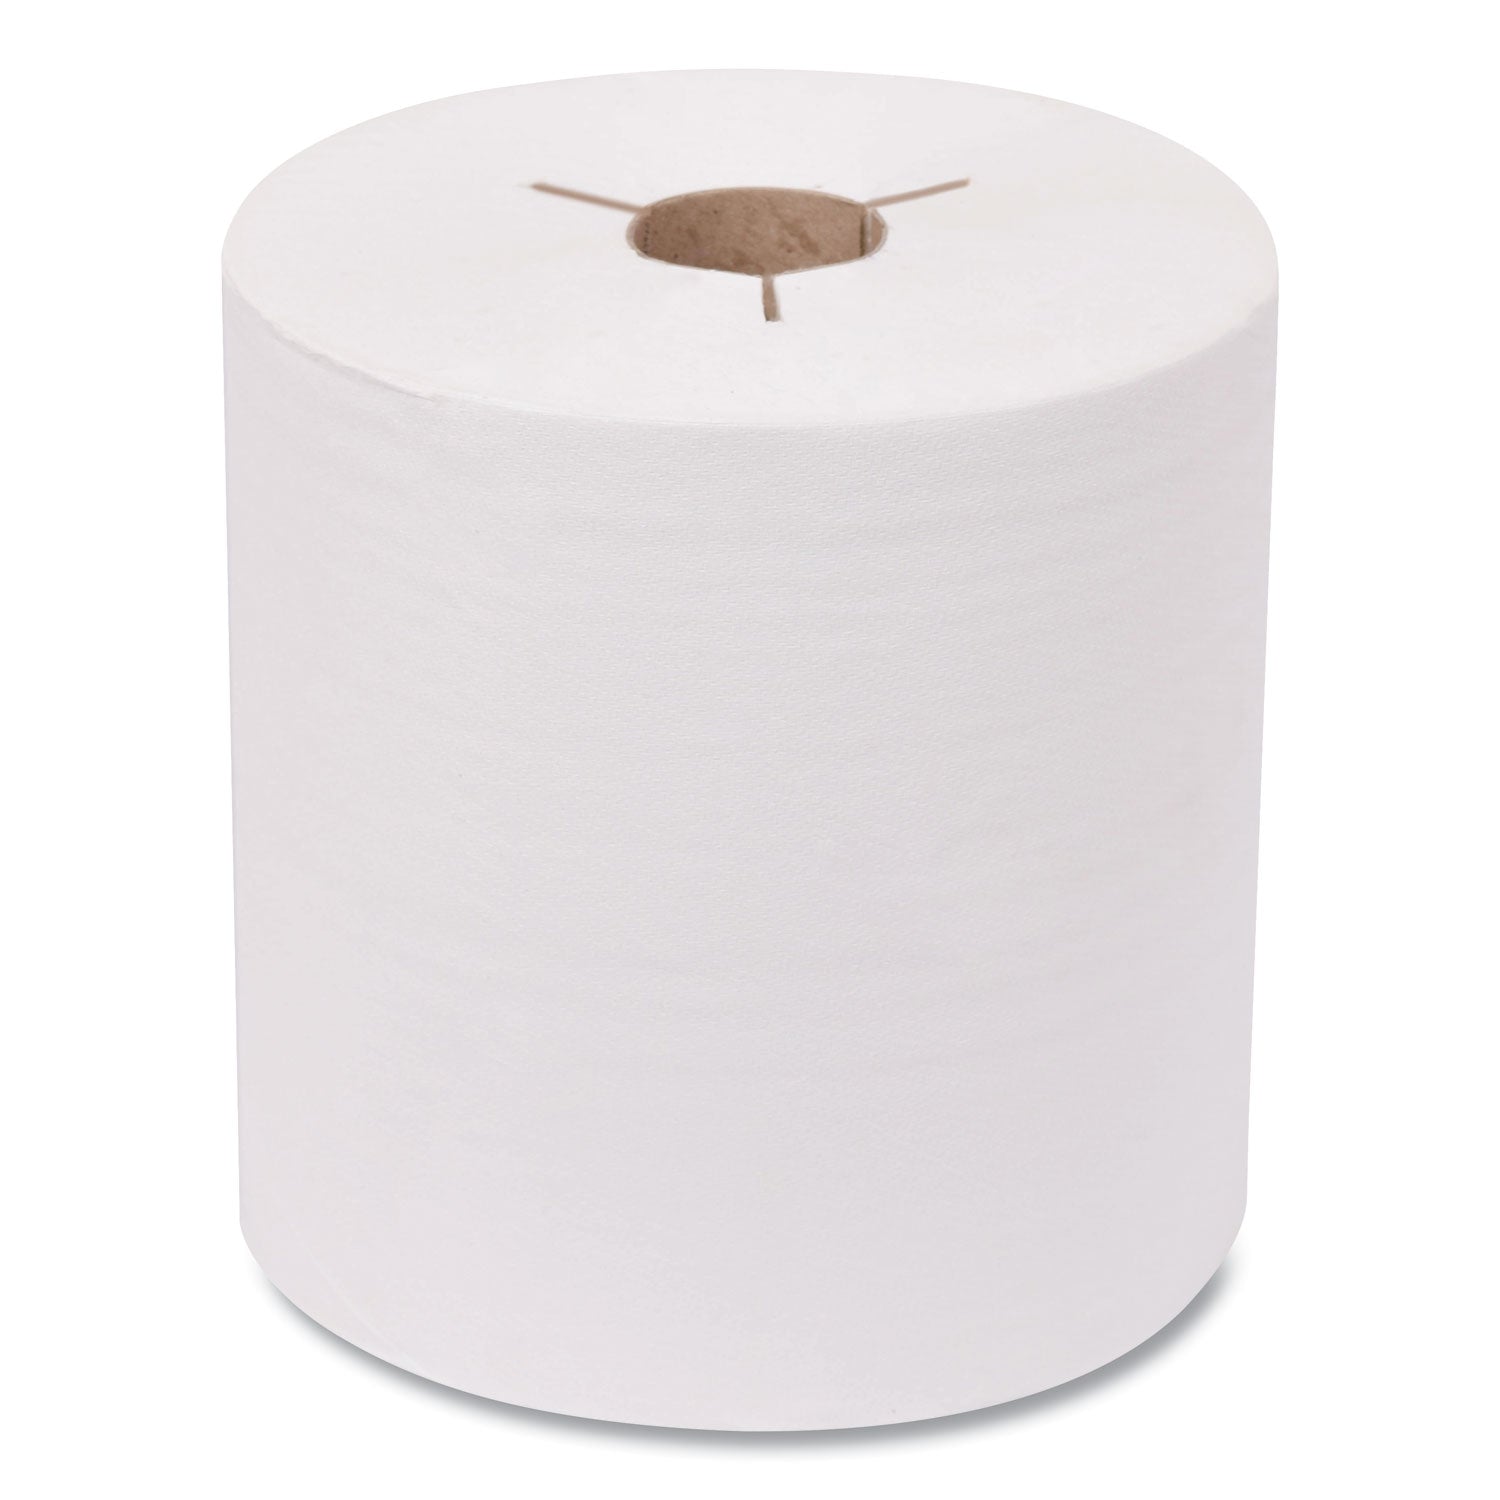 advanced-hand-towel-roll-notched-1-ply-8-x-10-white-6-rolls-carton_trk8031050 - 1